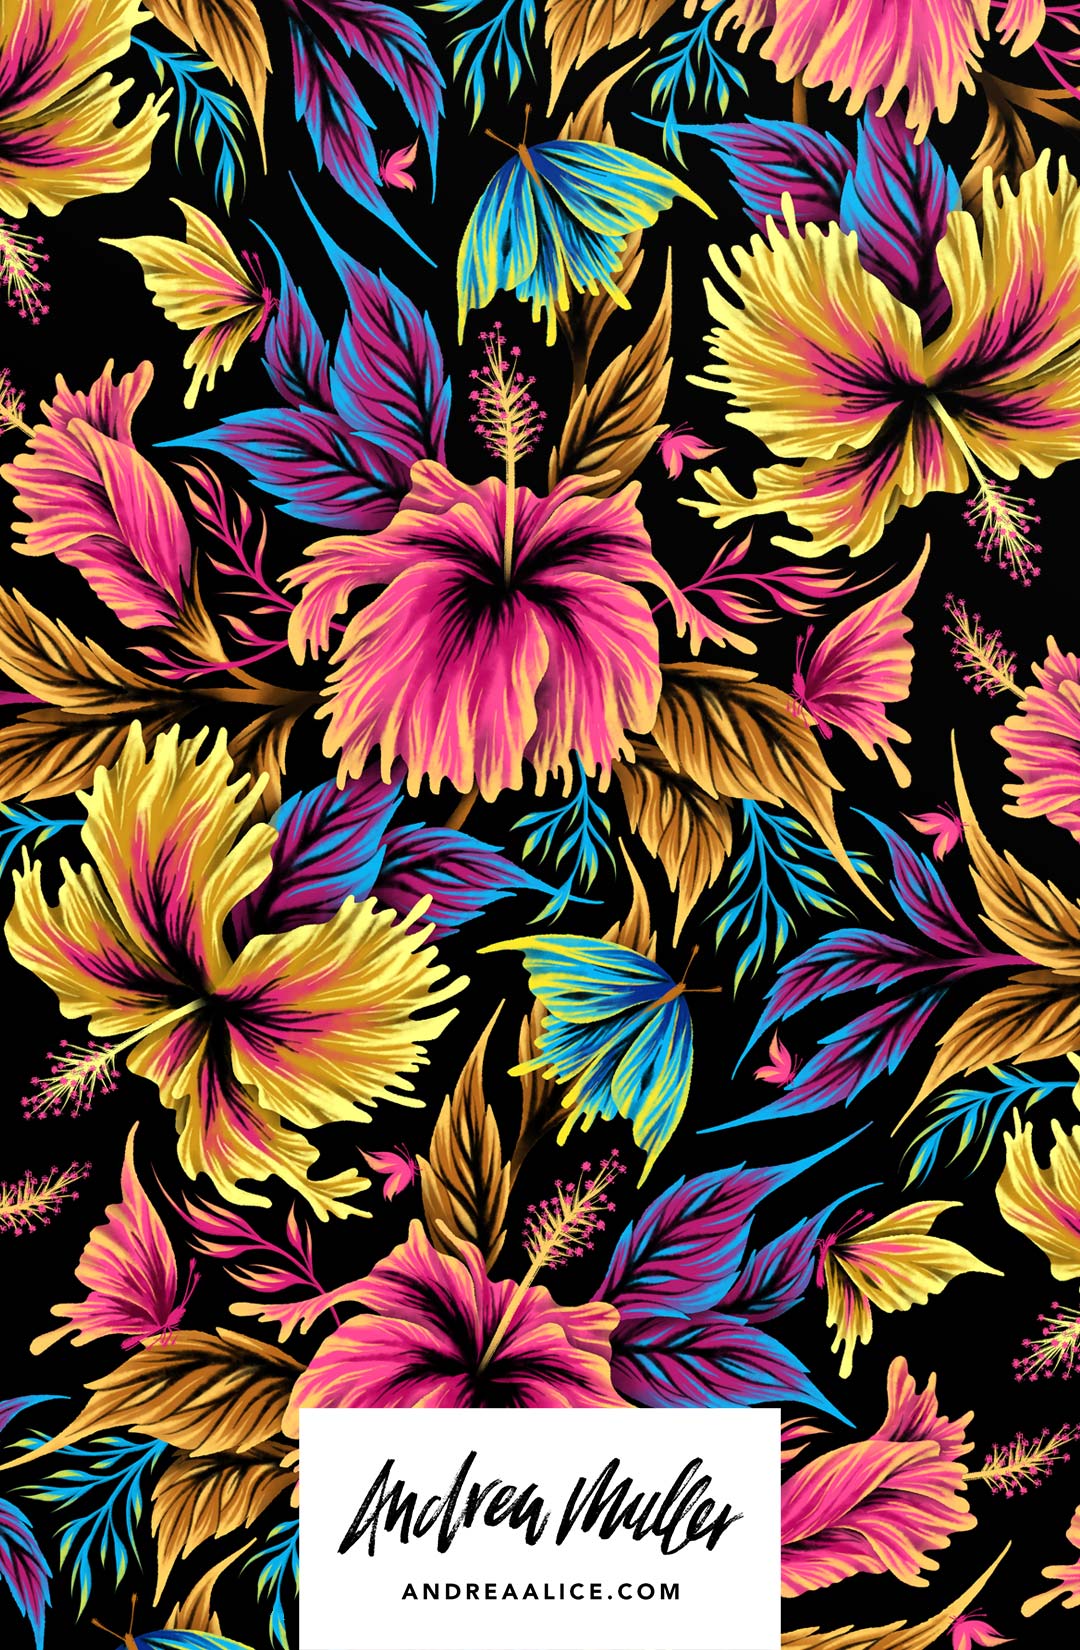 Colorful tropical hibiscus butterflies pattern illustration by Andrea Muller